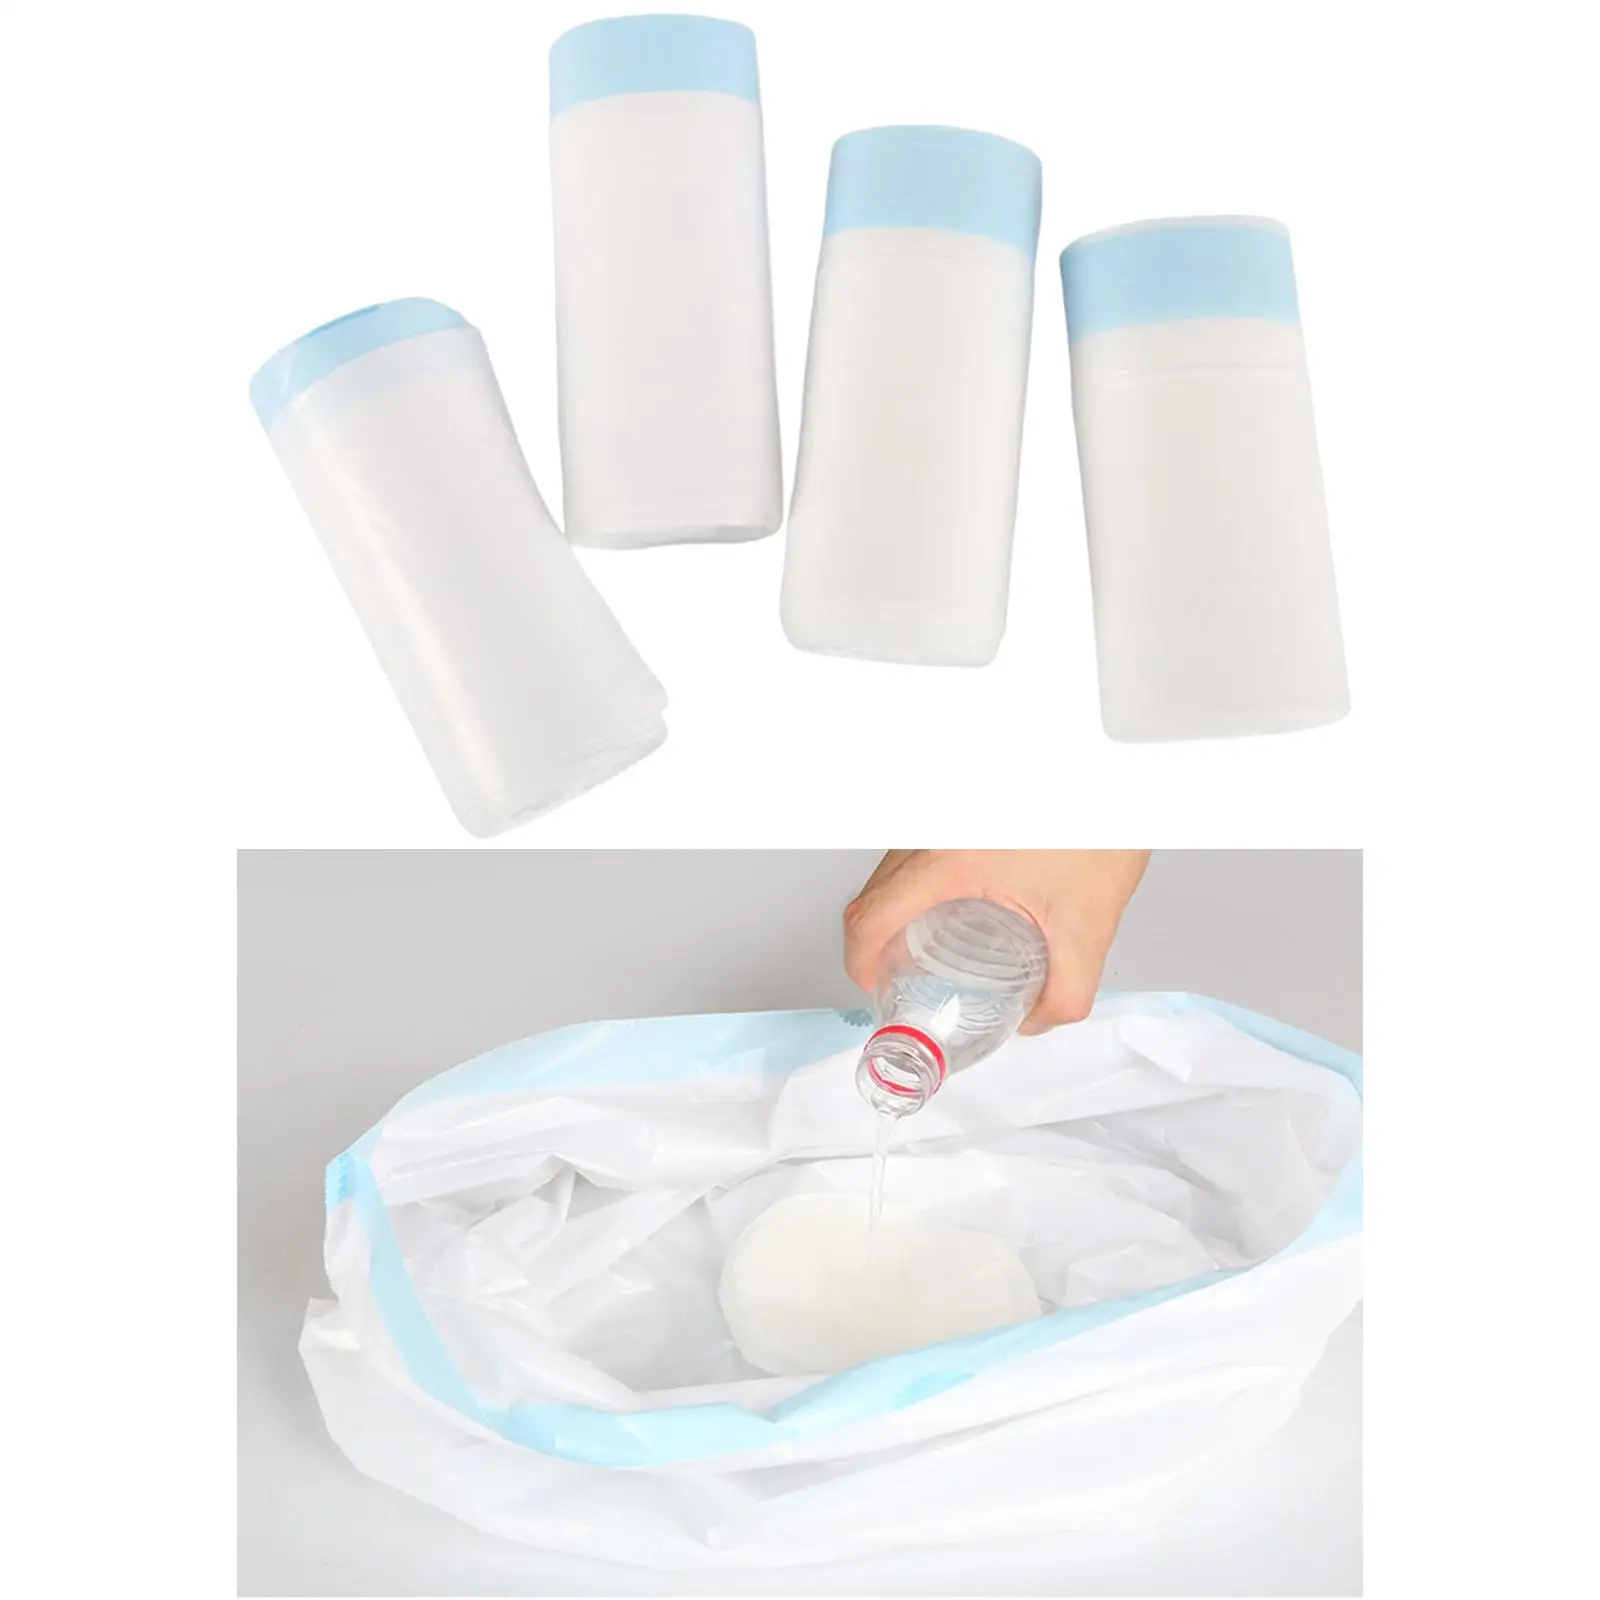 Bedside Commode Liners, with Absorbent Pad, Toilet Bags Drawstring Bag Commode Chair Large Universal for Seniors Travel Camping